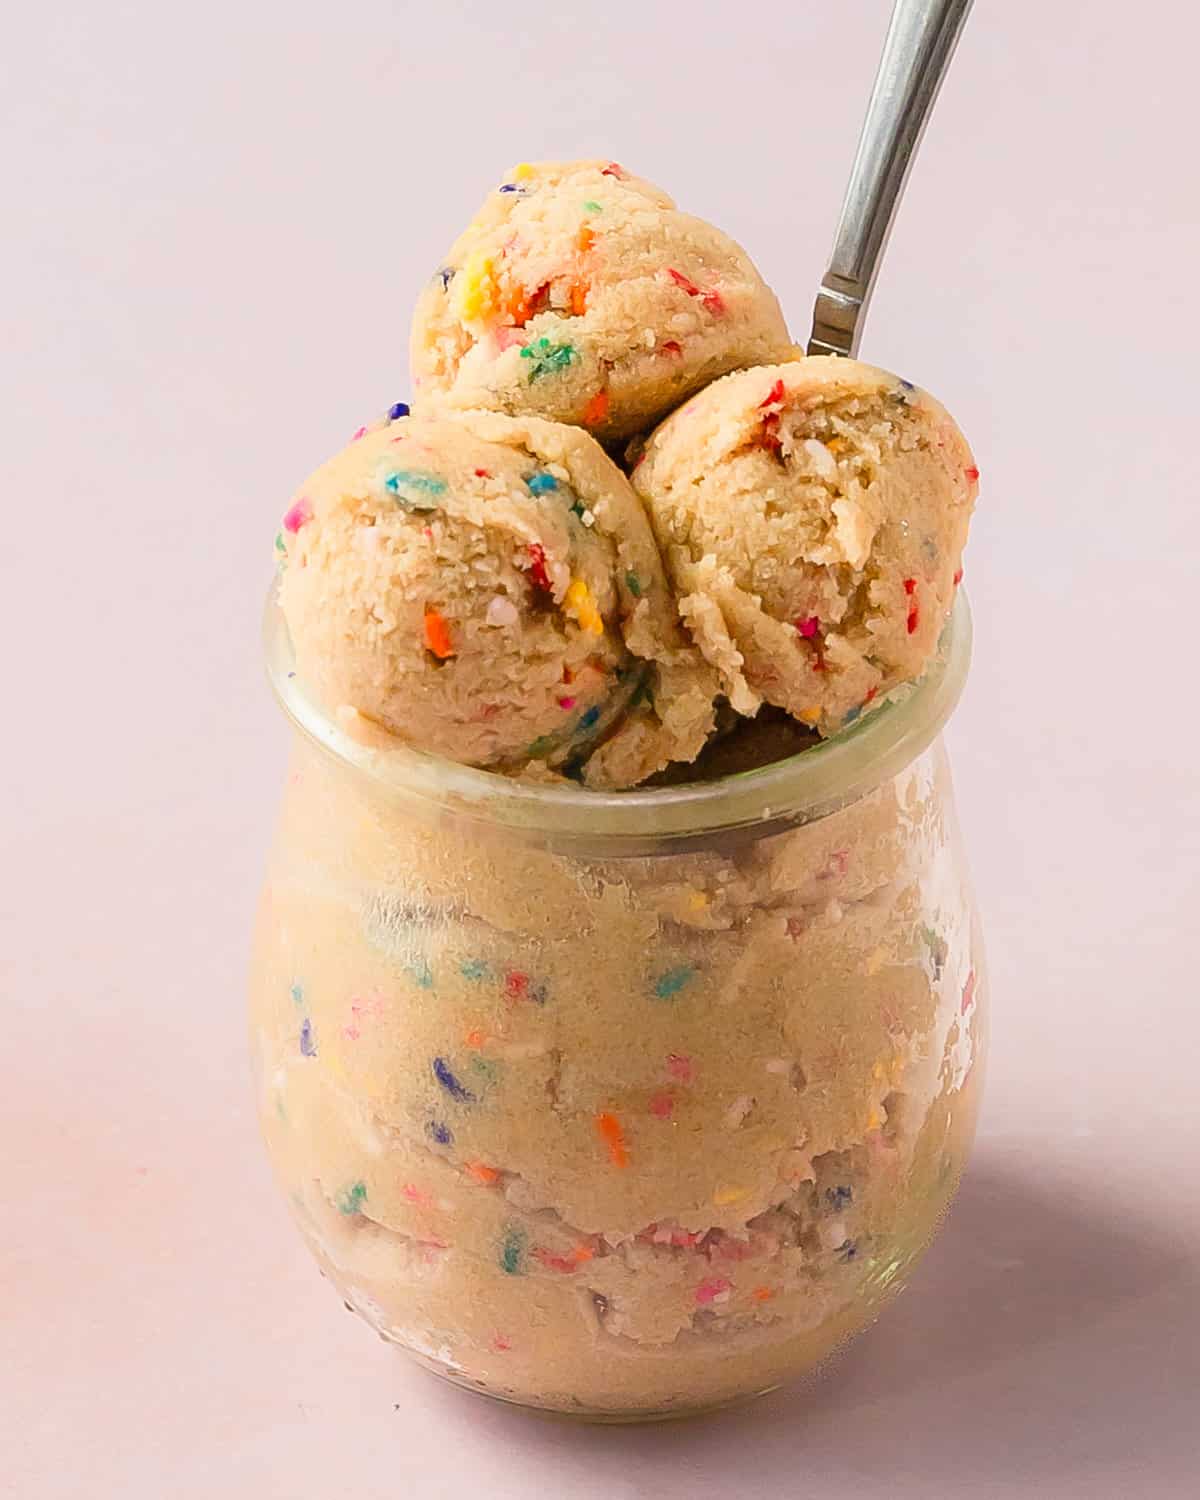 Edible sugar cookie cookie dough is a buttery, soft and sweet raw sugar cookie dough filled with sprinkles. This edible cookie dough is made with simple ingredients and takes less than 5 minutes to make. If you’re a fan of eating scoops of cookie dough by the spoonful, this easy edible sugar dough cookie recipe is for you!